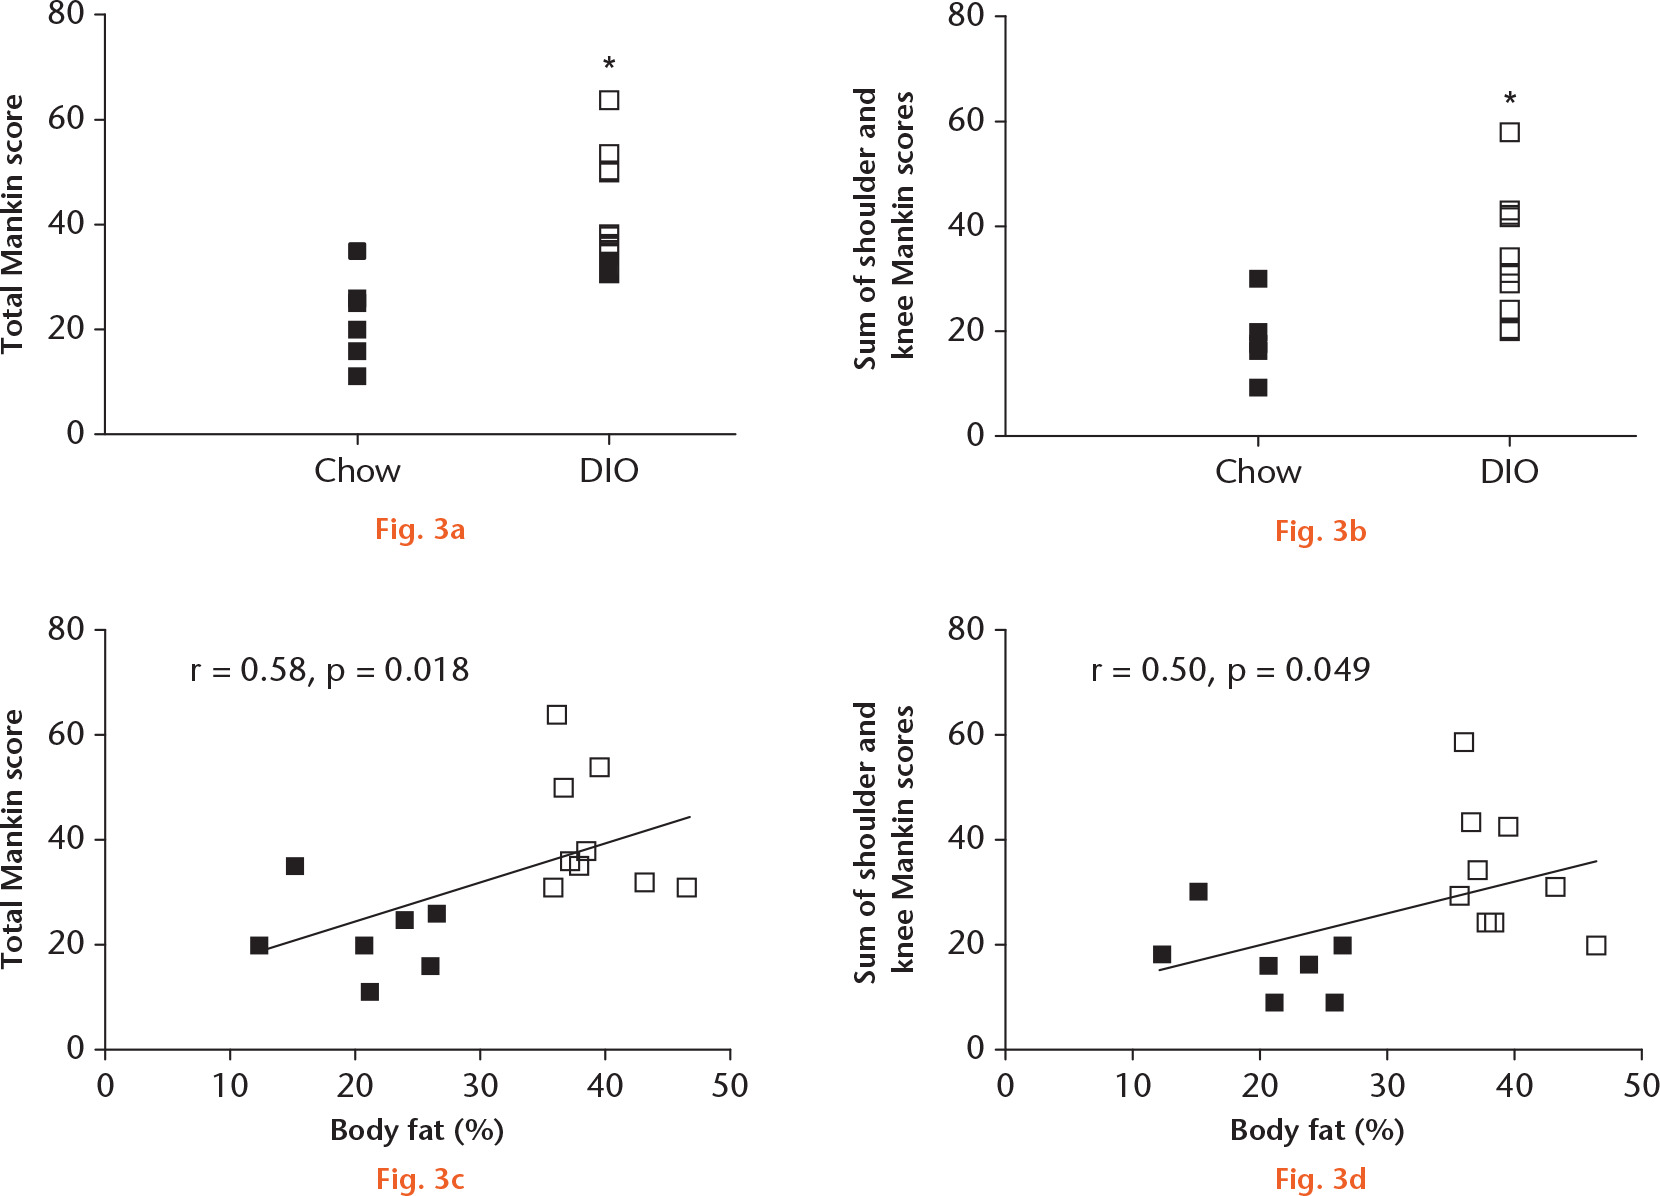  
            Graphs showing that: a) total Mankin score is increased in diet-induced obesity (DIO) animals versus chow-fed controls; b) the sum of knee and shoulder Mankin scores is increased in DIO animals versus chow-fed controls; c) total Mankin score is positively significantly associated with percentage of body fat across all animals; and d) the sum of knee and shoulder Mankin scores is positively significantly associated with percentage of body fat across all animals. Empty squares represent DIO animals (n = 9) and black squares represent chow-fed control animals (n = 7). *p ⩽ 0.05 in DIO versus chow.
          